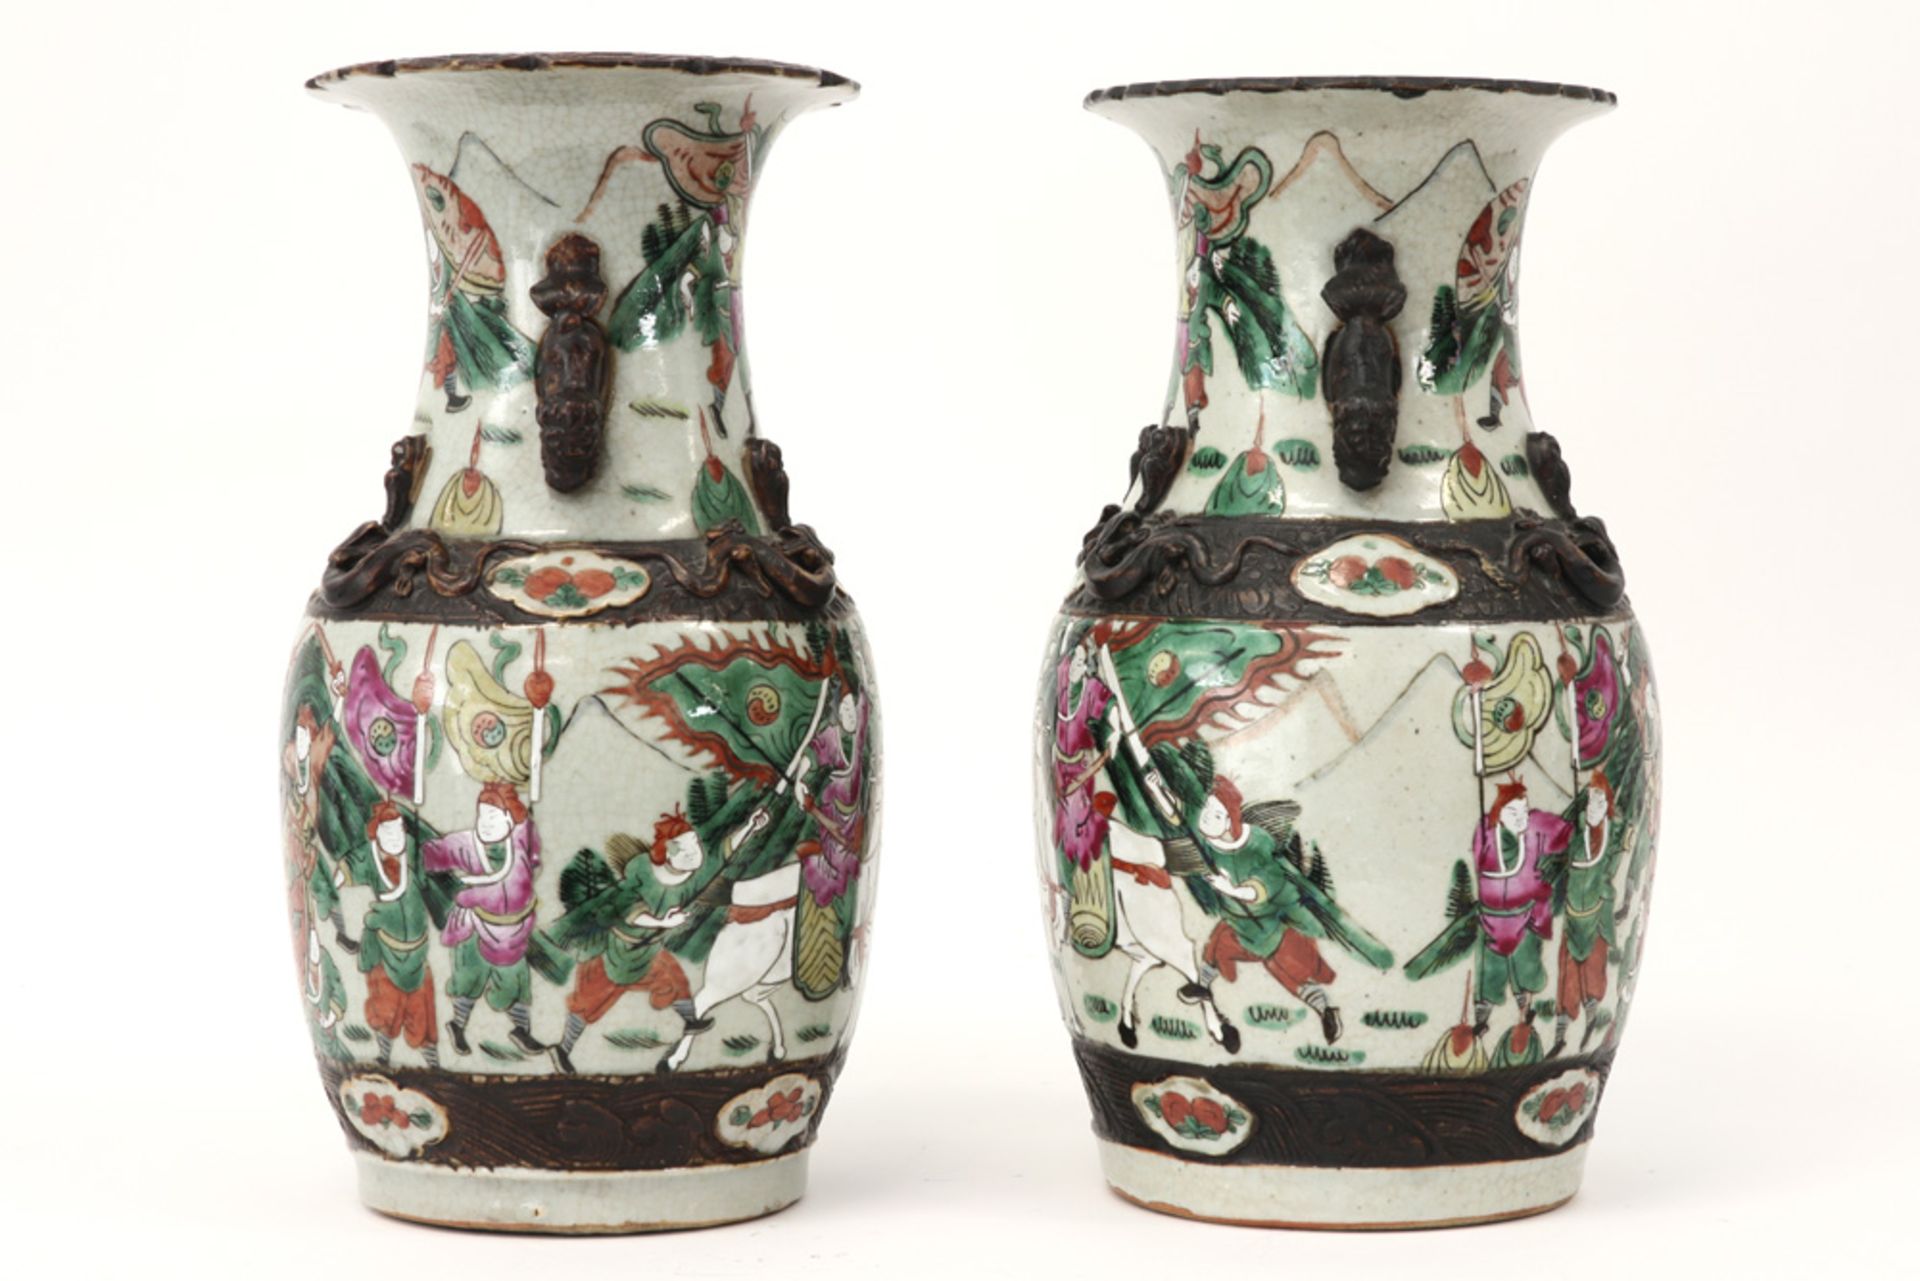 pair of antique Chinese "Nankin" vases in marked porcelain with a typical polychrome warriors' decor - Image 3 of 5